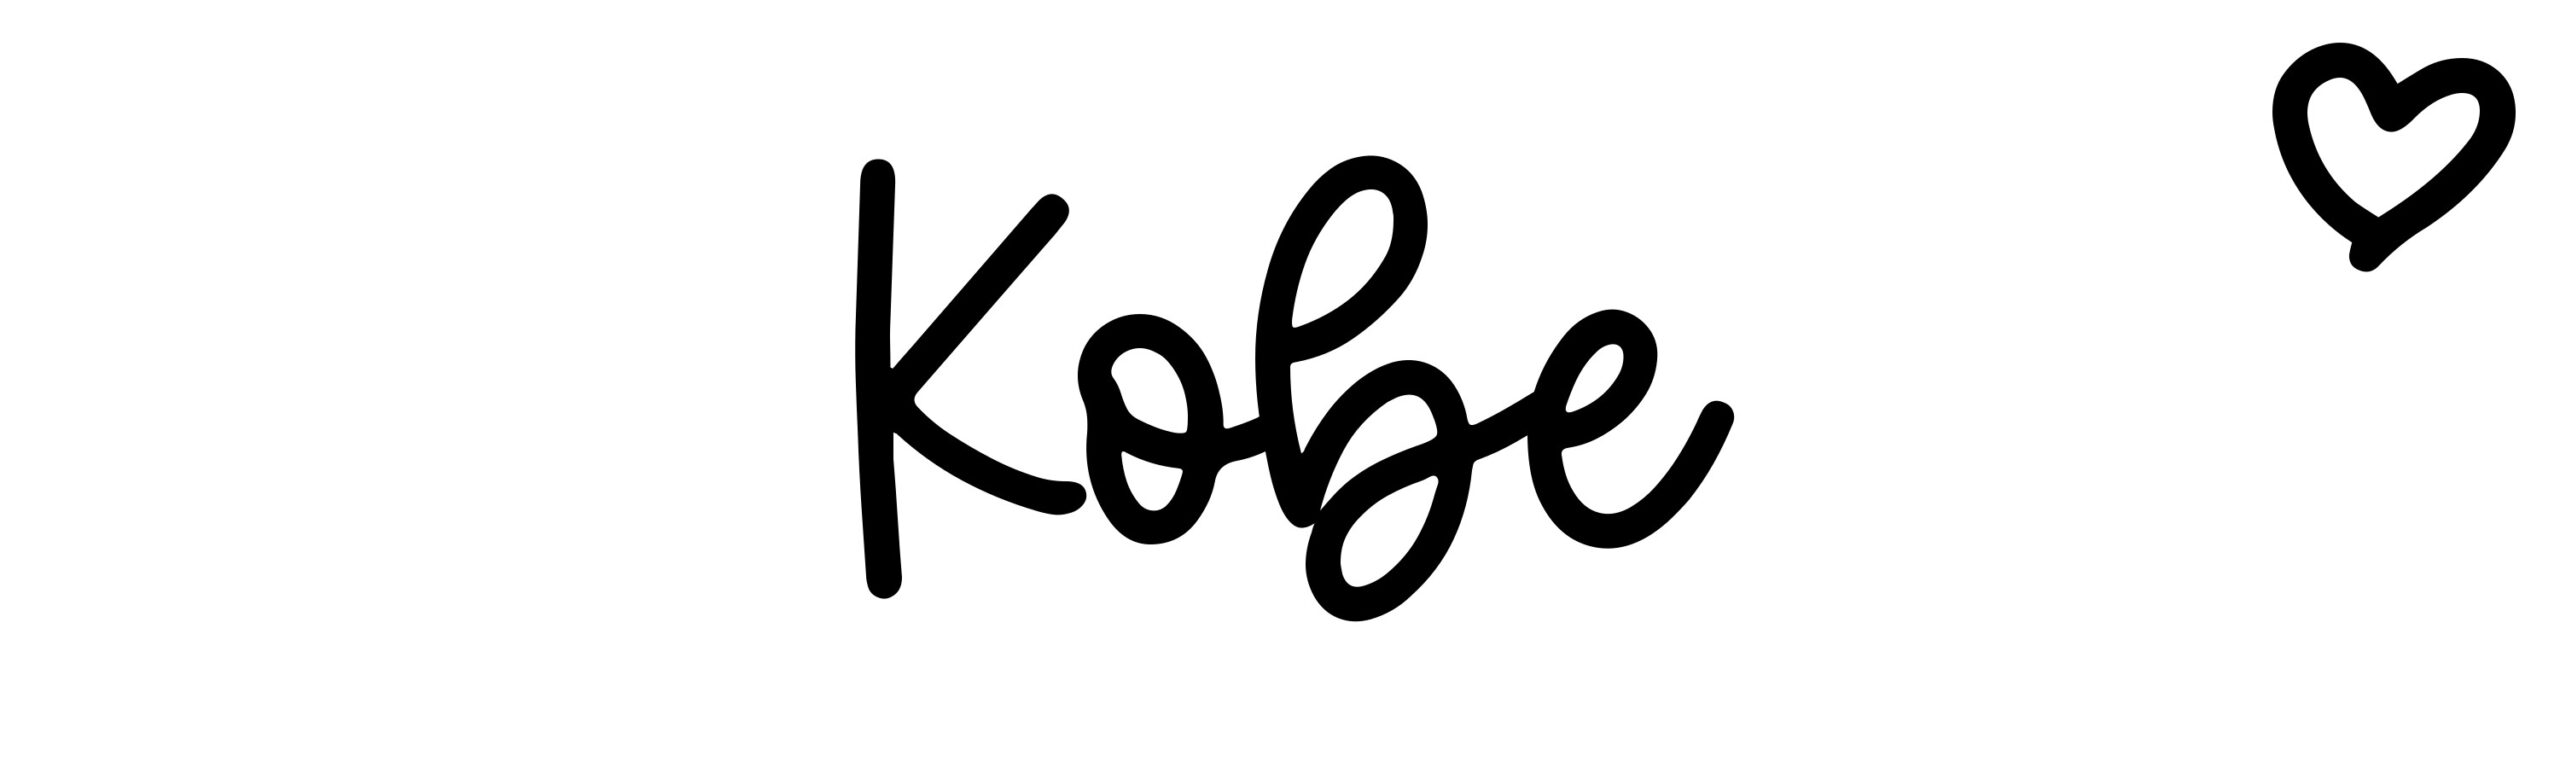 Kobe Name Meaning, Origin, History, And Popularity